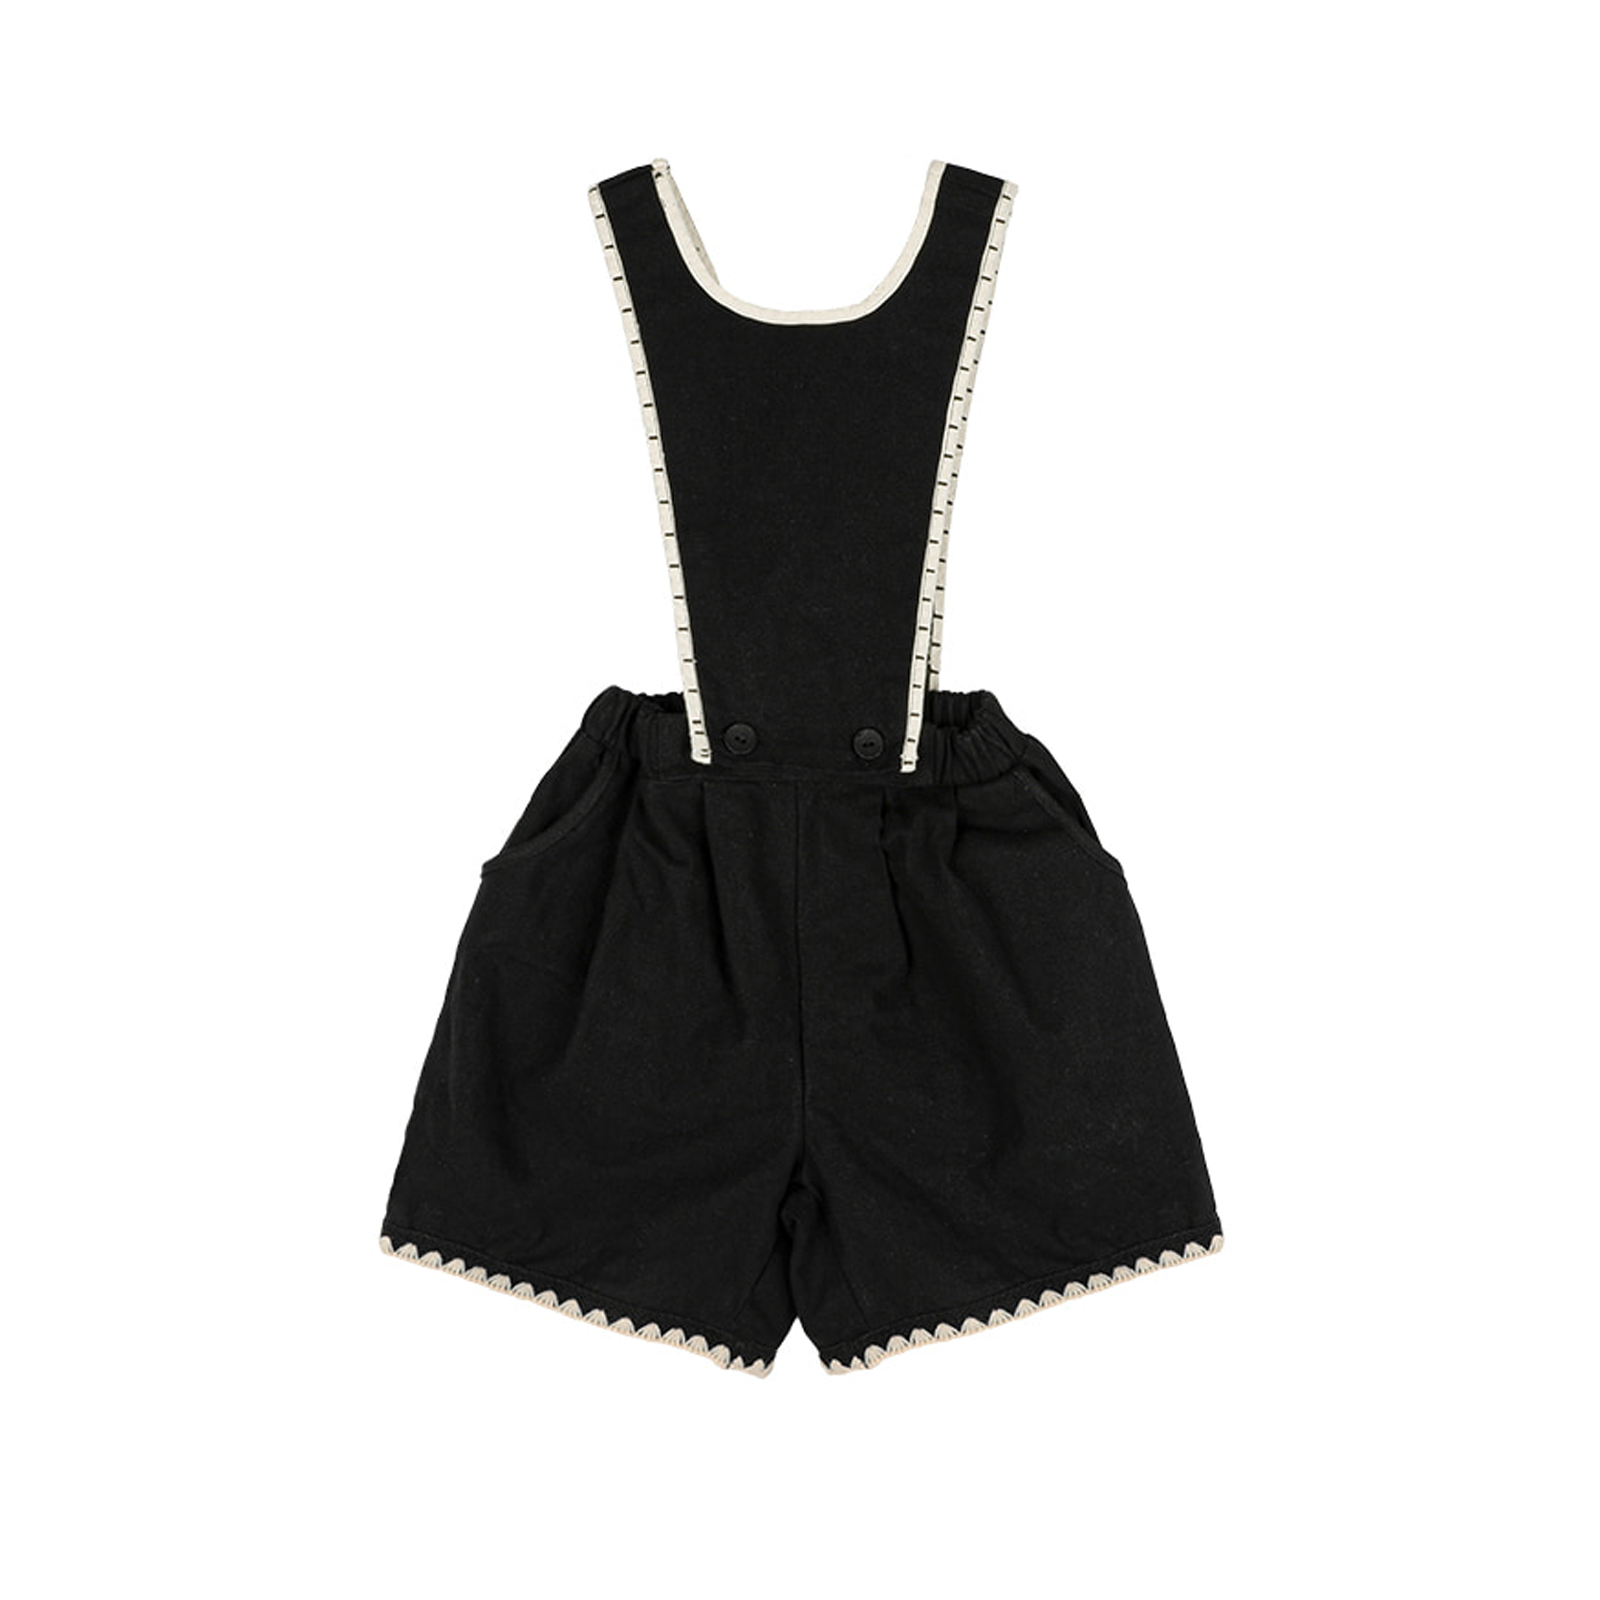 Detachable Overall Shorts in Black